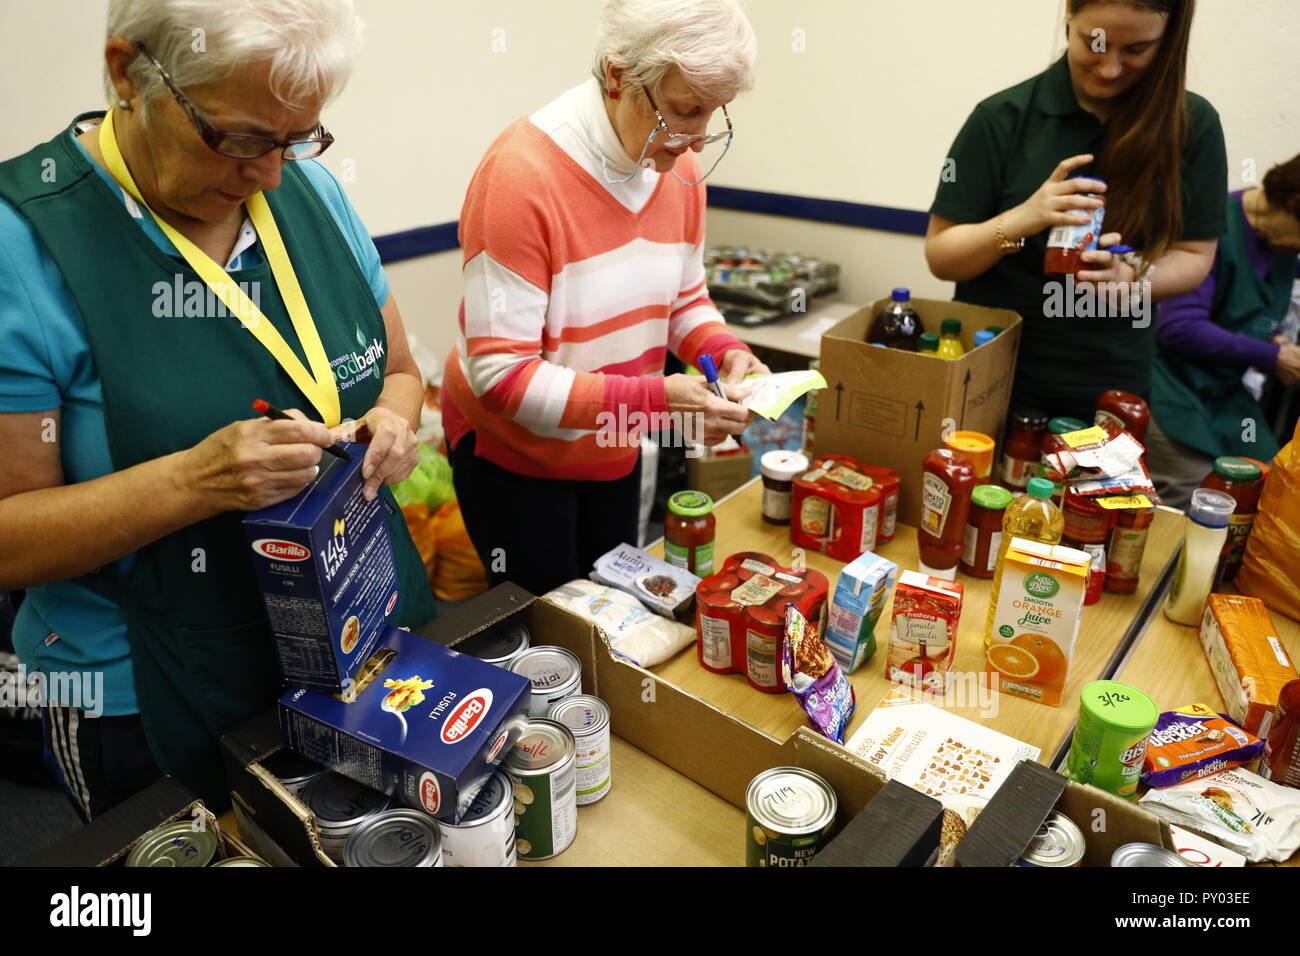 Gower Peninsula, Swansea, UK. 25th October 2018.  Swansea Foobank is experiencing high levels of demand, here at Gorseinon Institute, one of five foodbanks throughout the city.  One volunteer commented: 'the welfare state used to be the safety net but since Universal Credit, now it's the Foodbanks'. Swansea, Wales, Credit: Gareth Llewelyn/Alamy Live News. Stock Photo